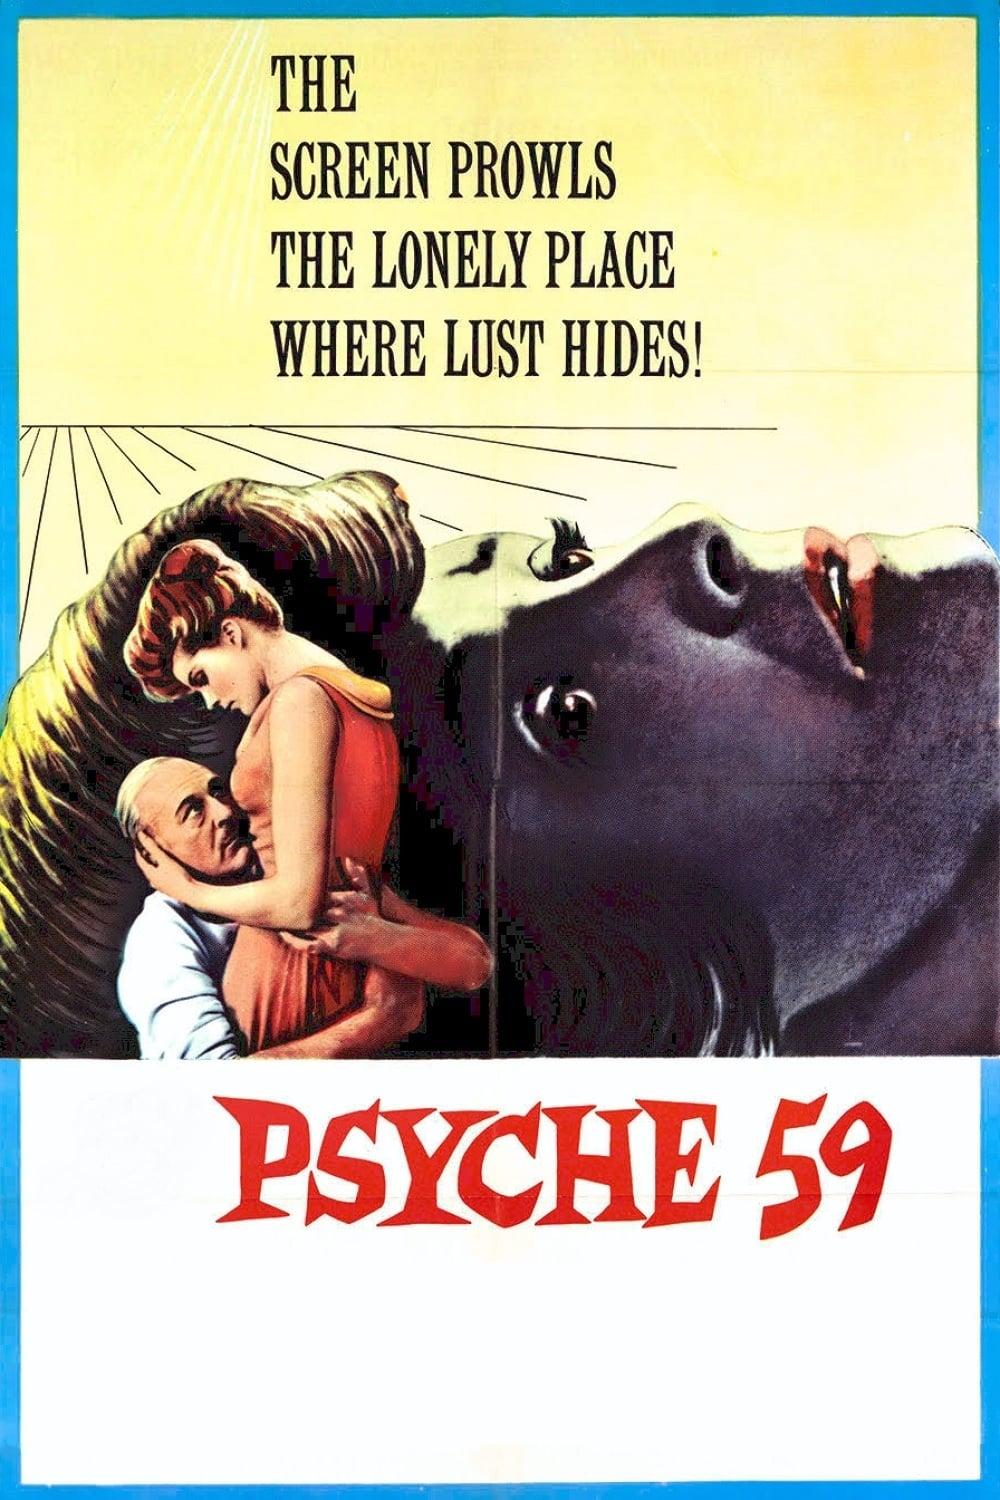 Psyche 59 poster